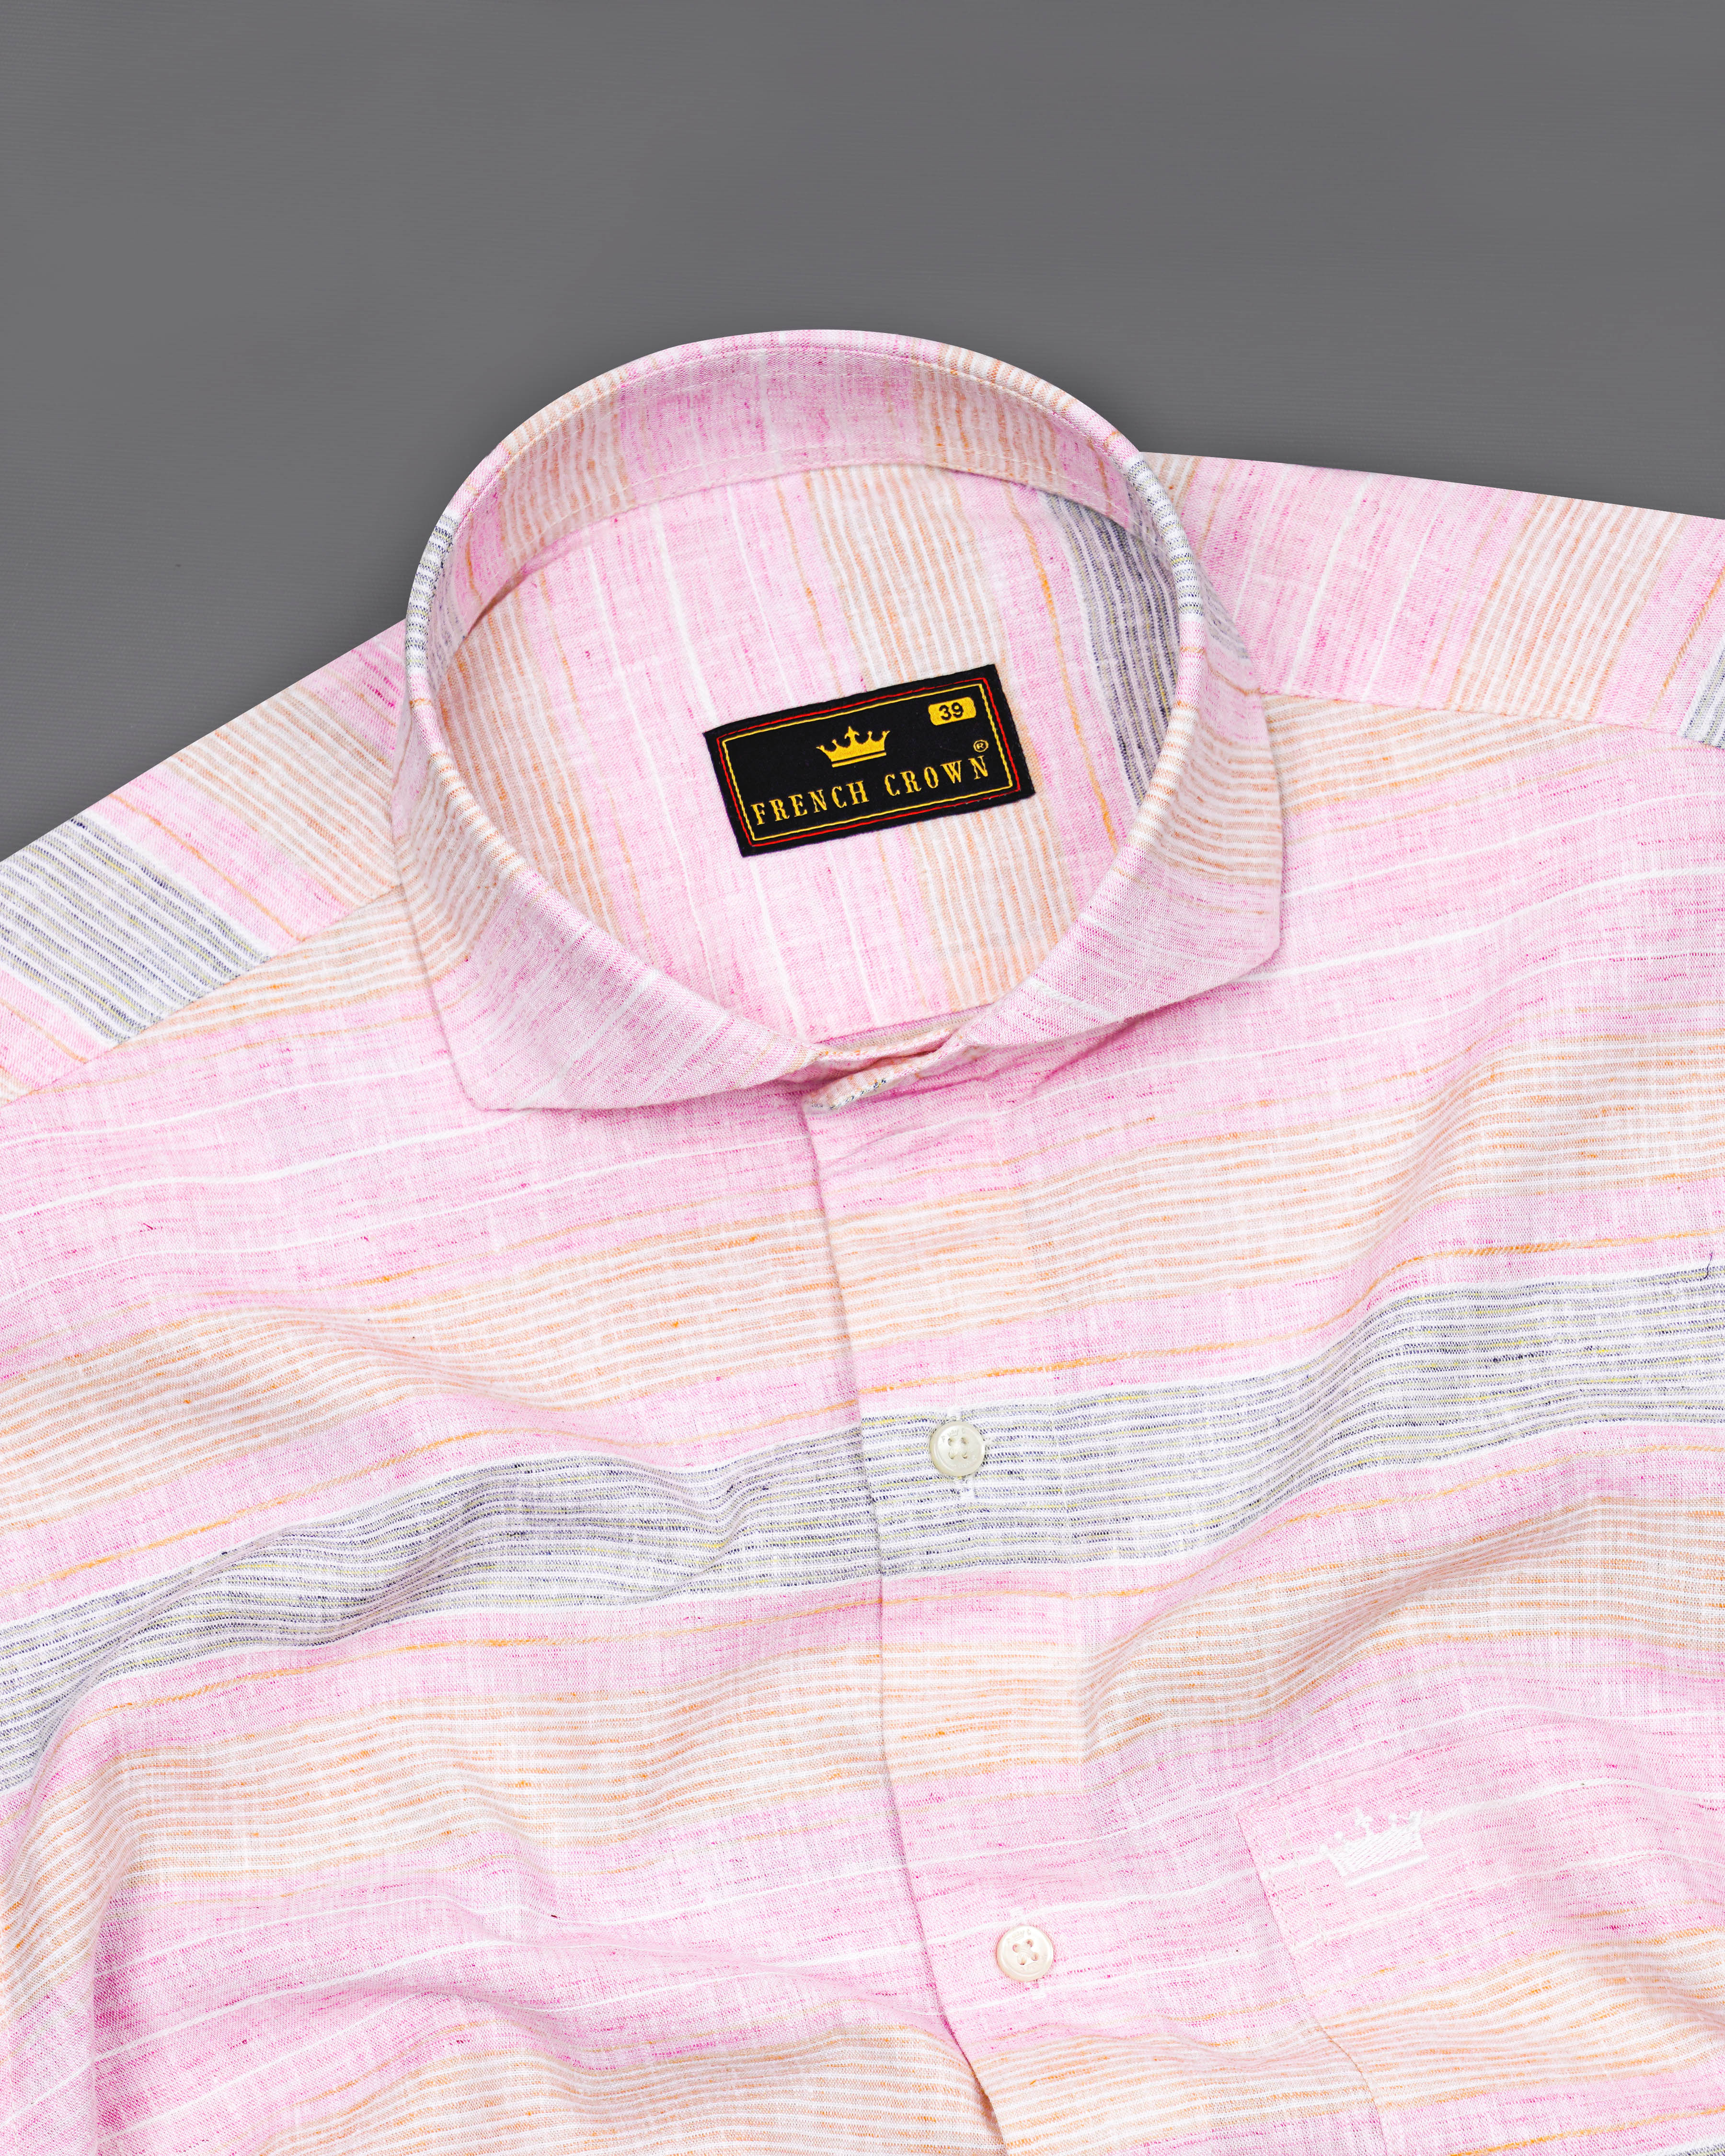 Pastel Pink Multicolour Striped Luxurious Linen Shirt  8555-CA-38,8555-CA-H-38,8555-CA-39,8555-CA-H-39,8555-CA-40,8555-CA-H-40,8555-CA-42,8555-CA-H-42,8555-CA-44,8555-CA-H-44,8555-CA-46,8555-CA-H-46,8555-CA-48,8555-CA-H-48,8555-CA-50,8555-CA-H-50,8555-CA-52,8555-CA-H-52